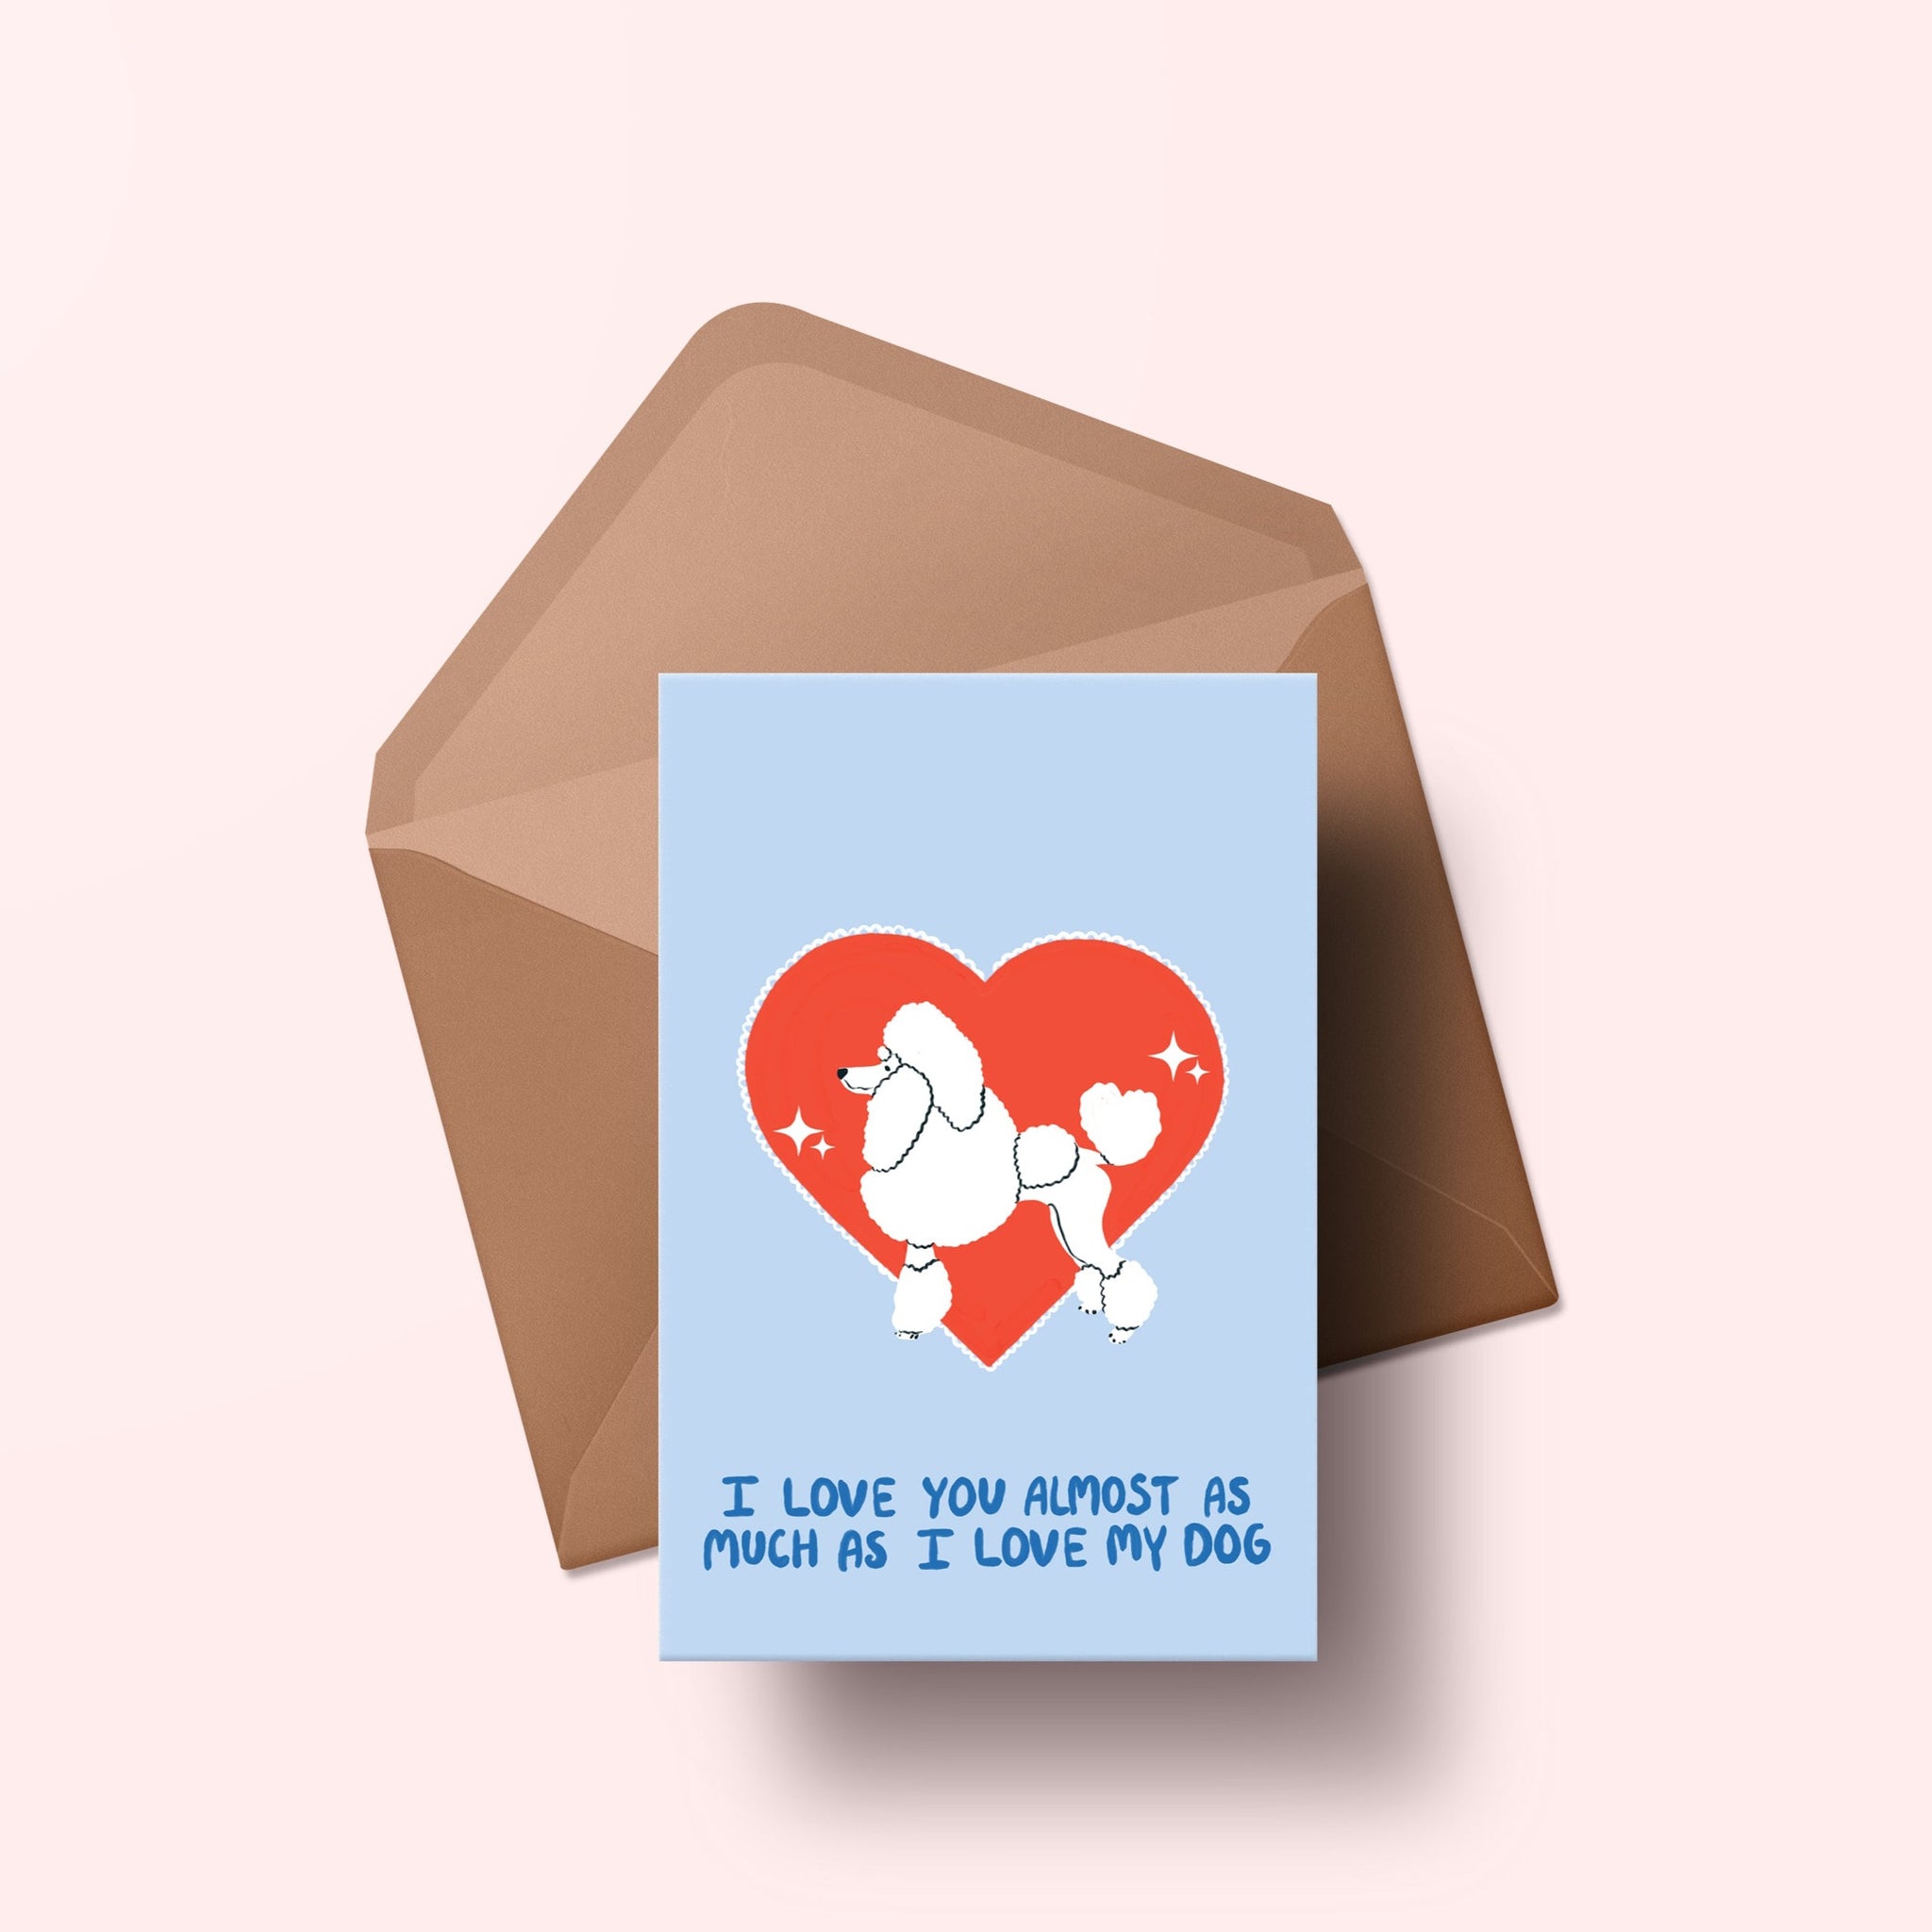 image of a greetings card featuring an illustration of a poodle with a red heart behind it. The background of the card is a light blue and beneath the heart and dog are the words I love you almost as much as my dog in handwritten lettering in a darker blue shade. Behind the card is an envelope made of a recycled kraft material.